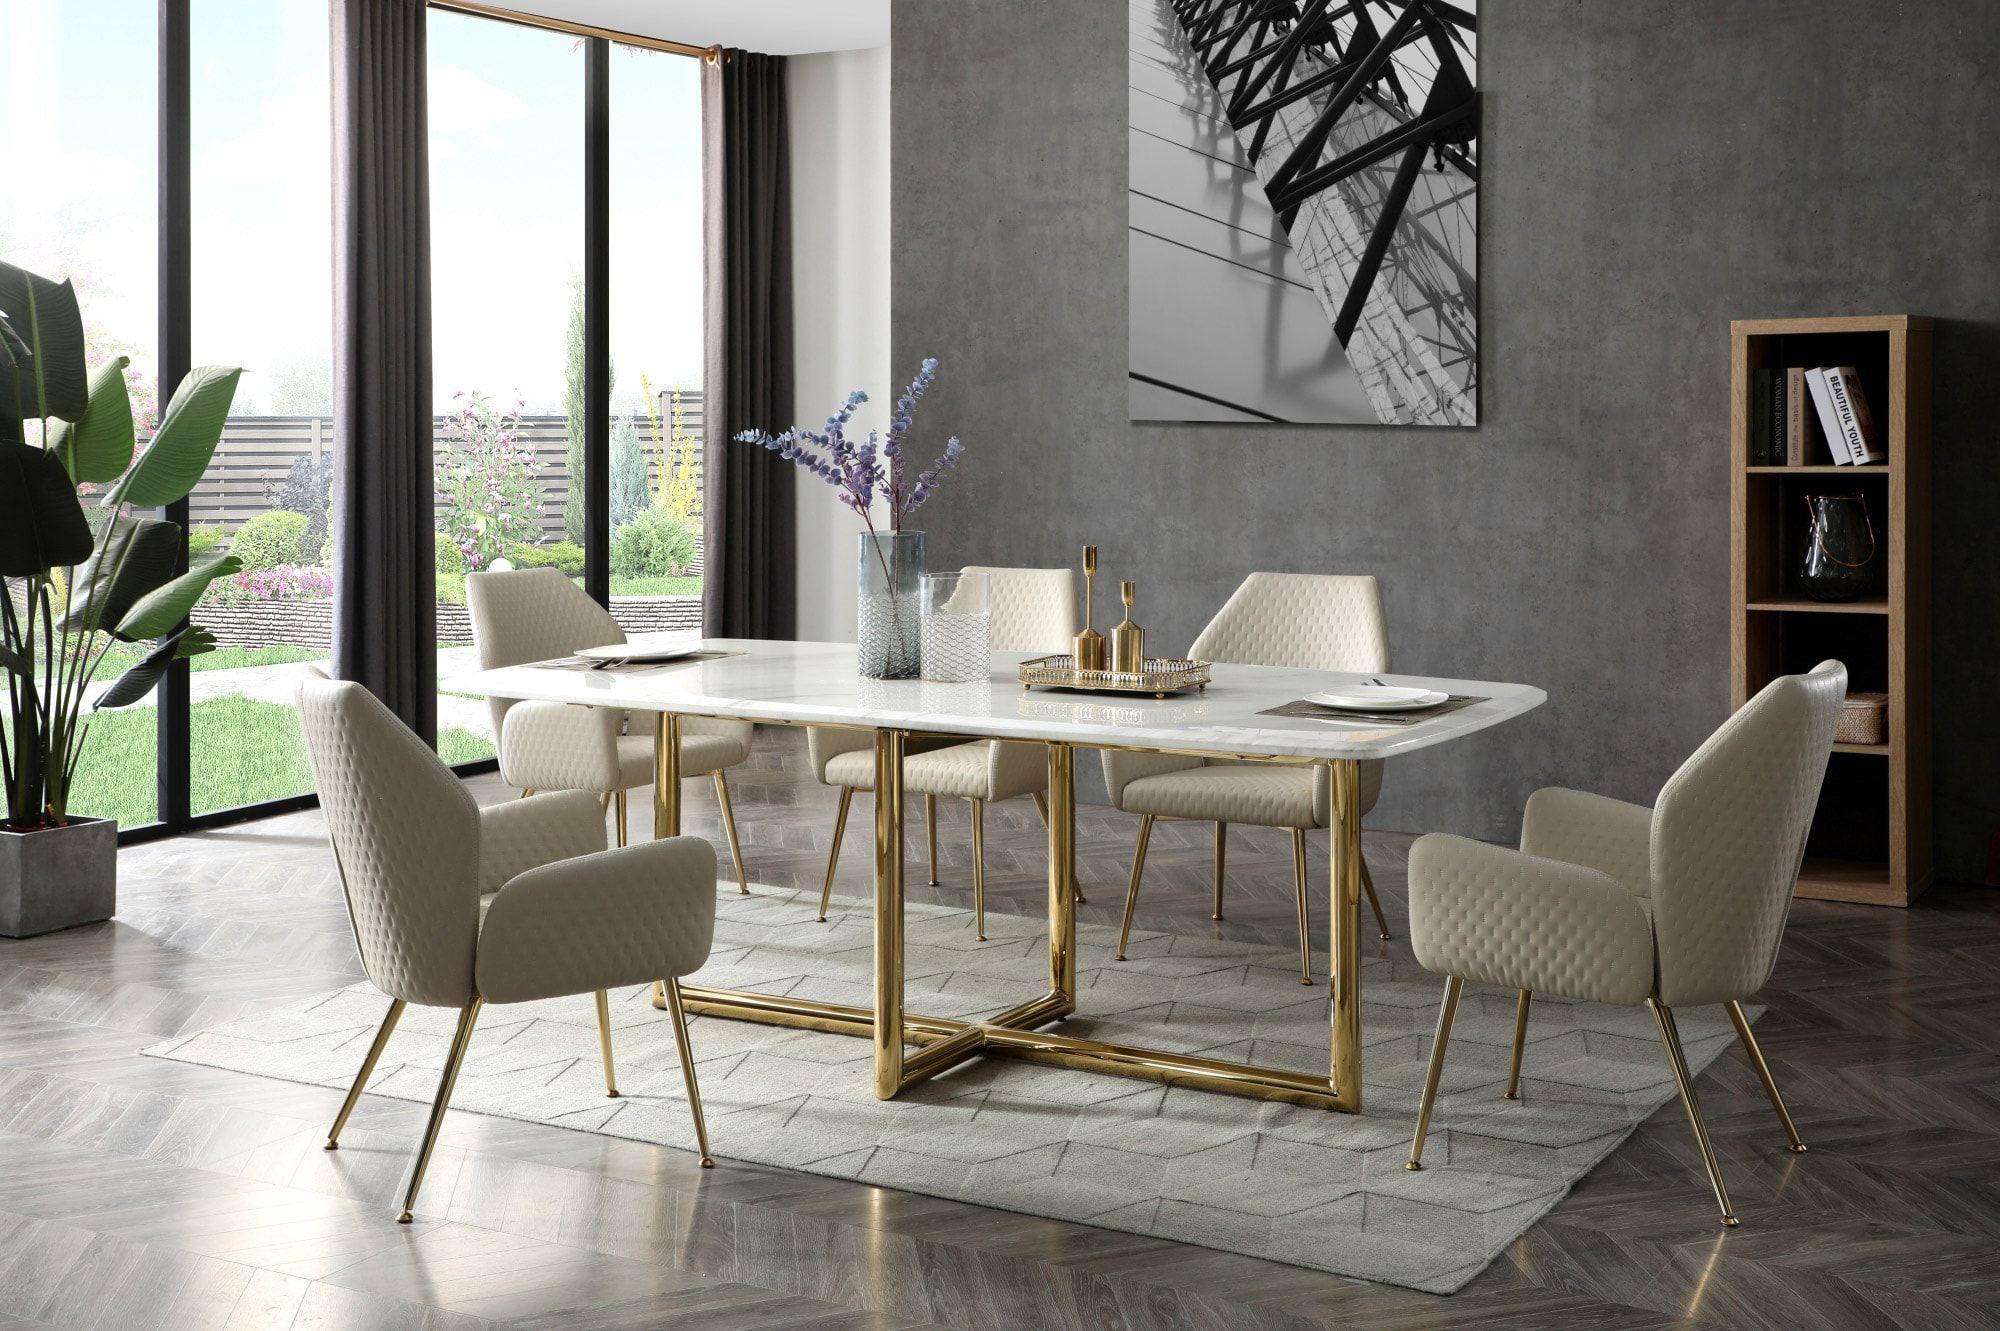 Contemporary, Modern Dining Room Set Empress VGVCT1908-9pcs in White, Gold Fabric